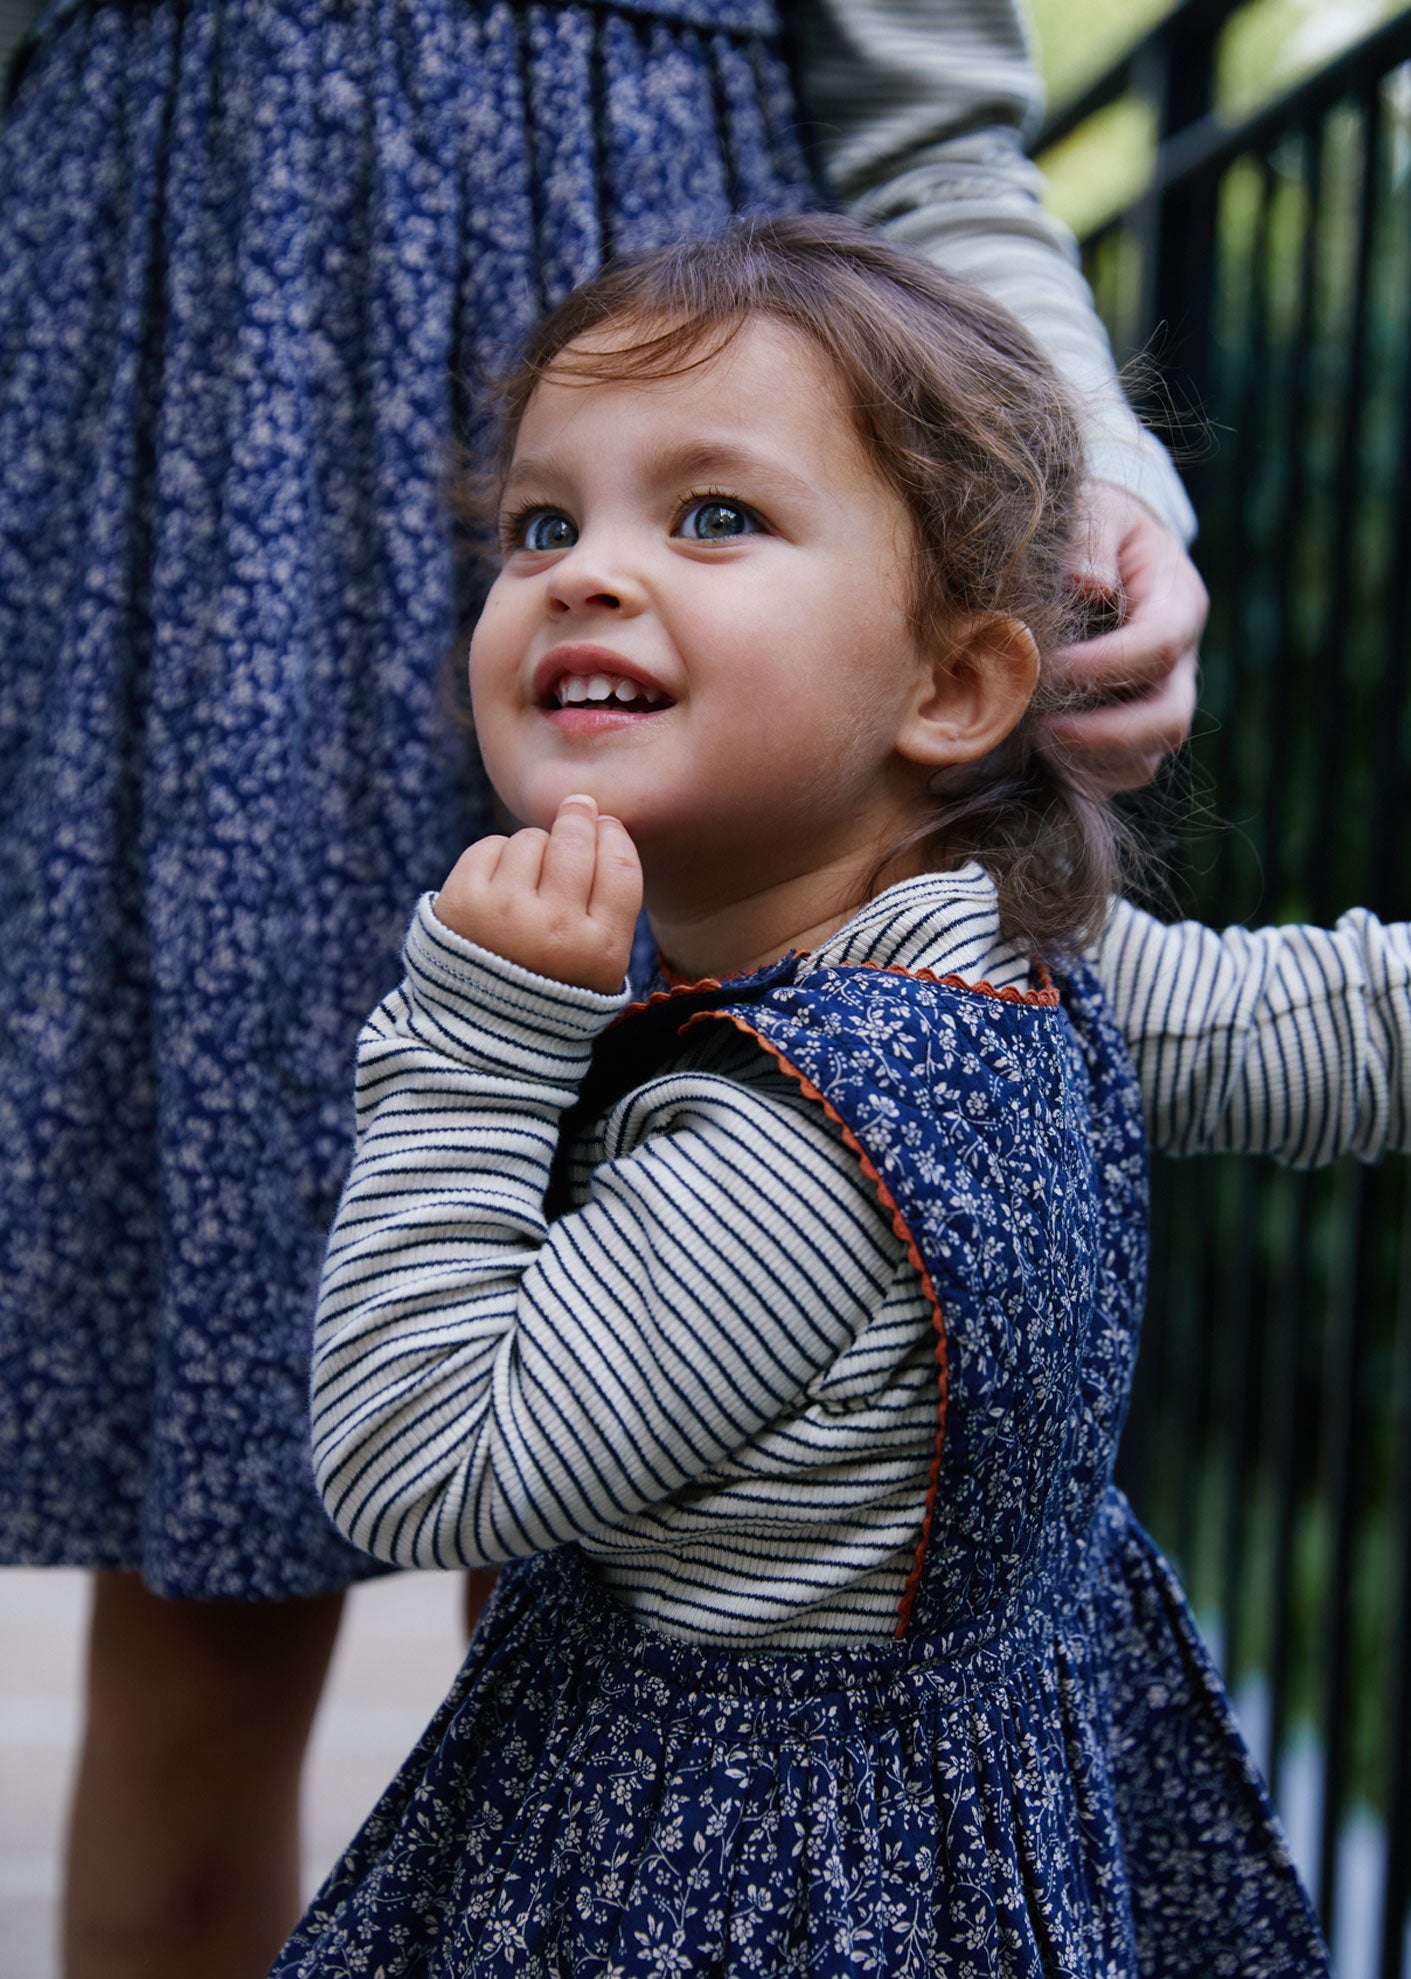 COLIMA BABY DRESS - NAVY FLORAL